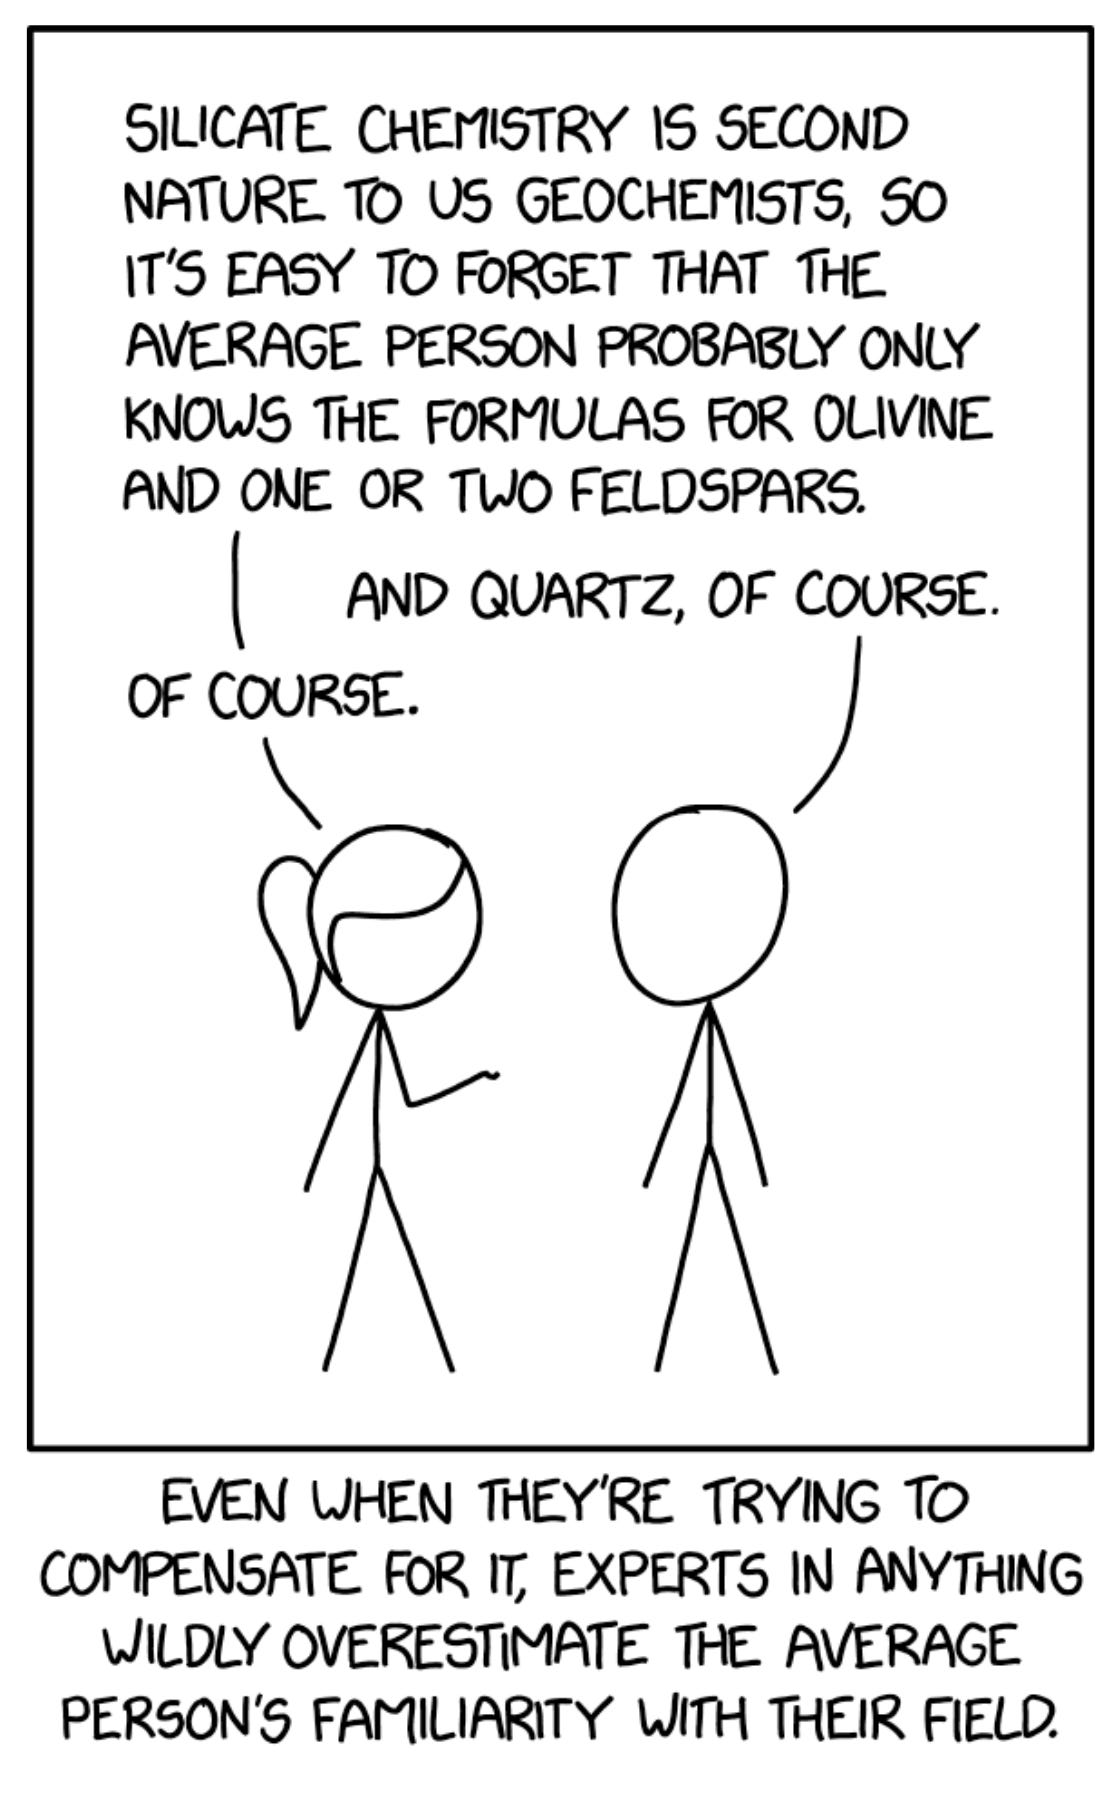 Two stick figures talking. One says, “Silicate chemistry is second nature to us geochemists, so it’s easy to forget that the average person probably only knows the formulas for olivine and one or two feldspars.” The other replies, “And quartz, of course.” The first says, “Of course.” Text at the bottom of the cartoon reads: Even when they’re trying to compensate for it. experts in anything wildly overestimate the average person’s familiarity with their field.